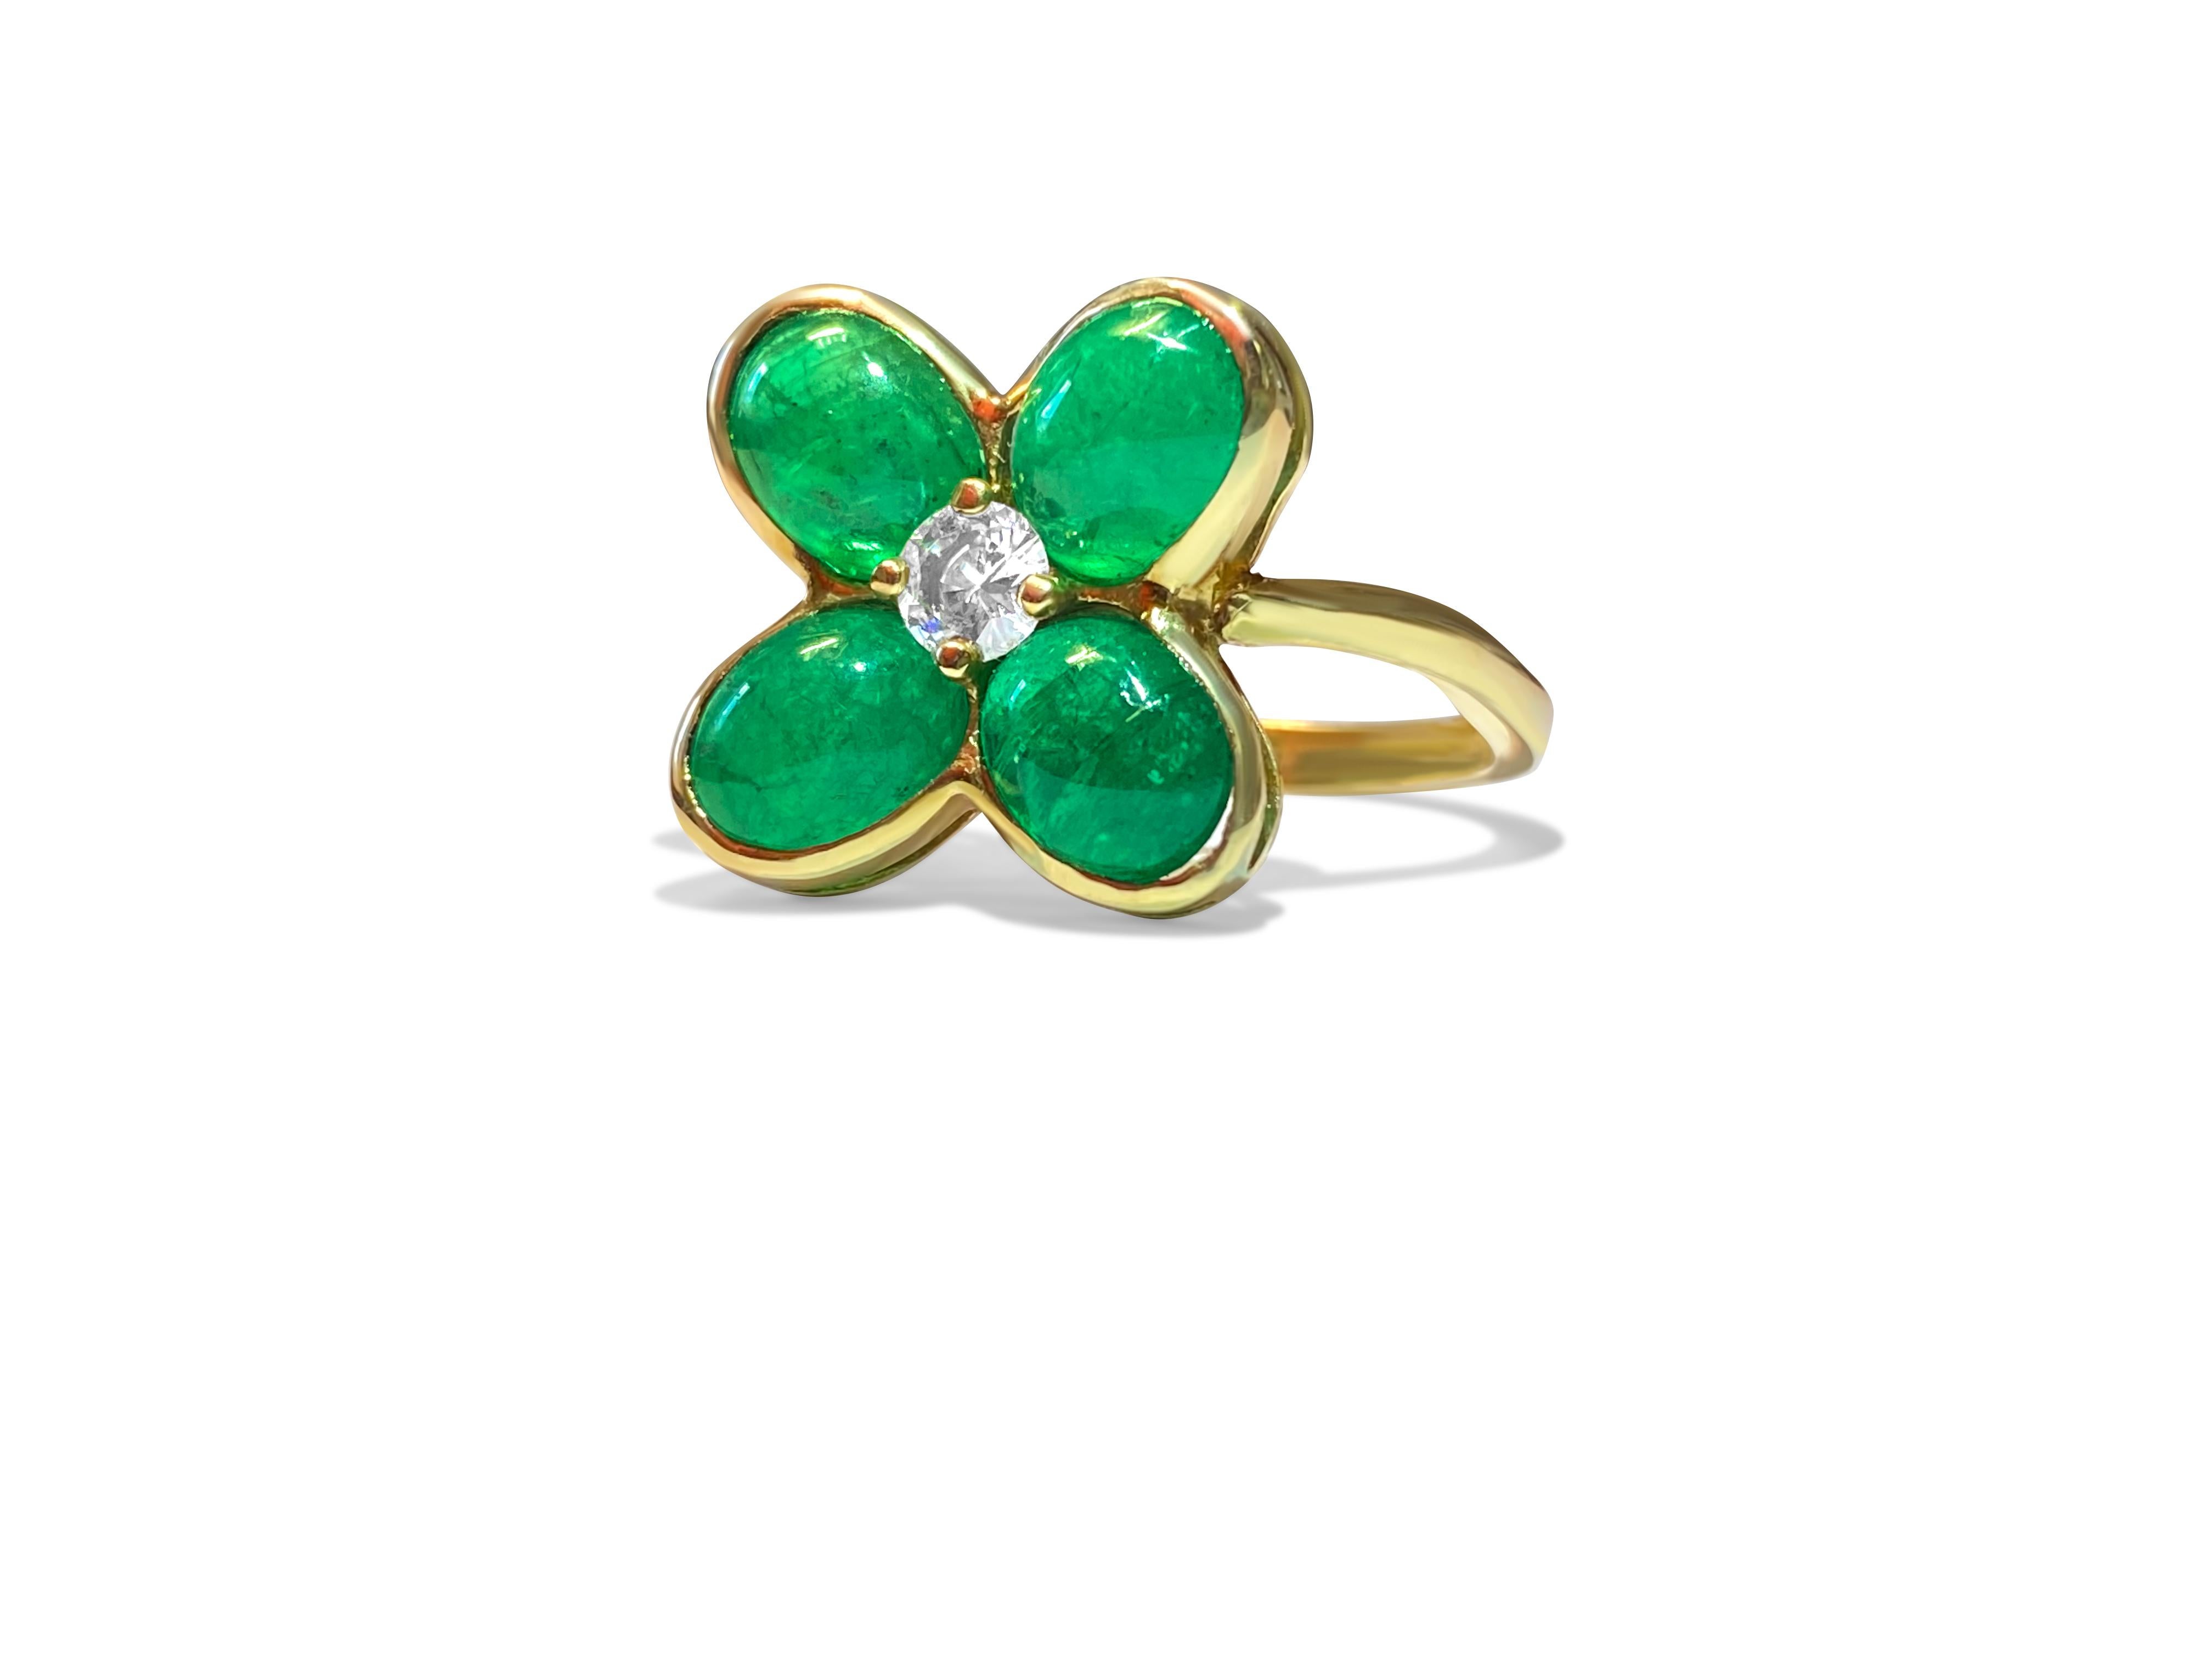 Elevate your style with our exquisite 18K Yellow Gold Ring, boasting a mesmerizing 8.50 CT Colombian emerald. Complemented by a 0.35 CT diamond, featuring VS clarity and F-G color, this ring radiates unparalleled beauty and sophistication. Crafted